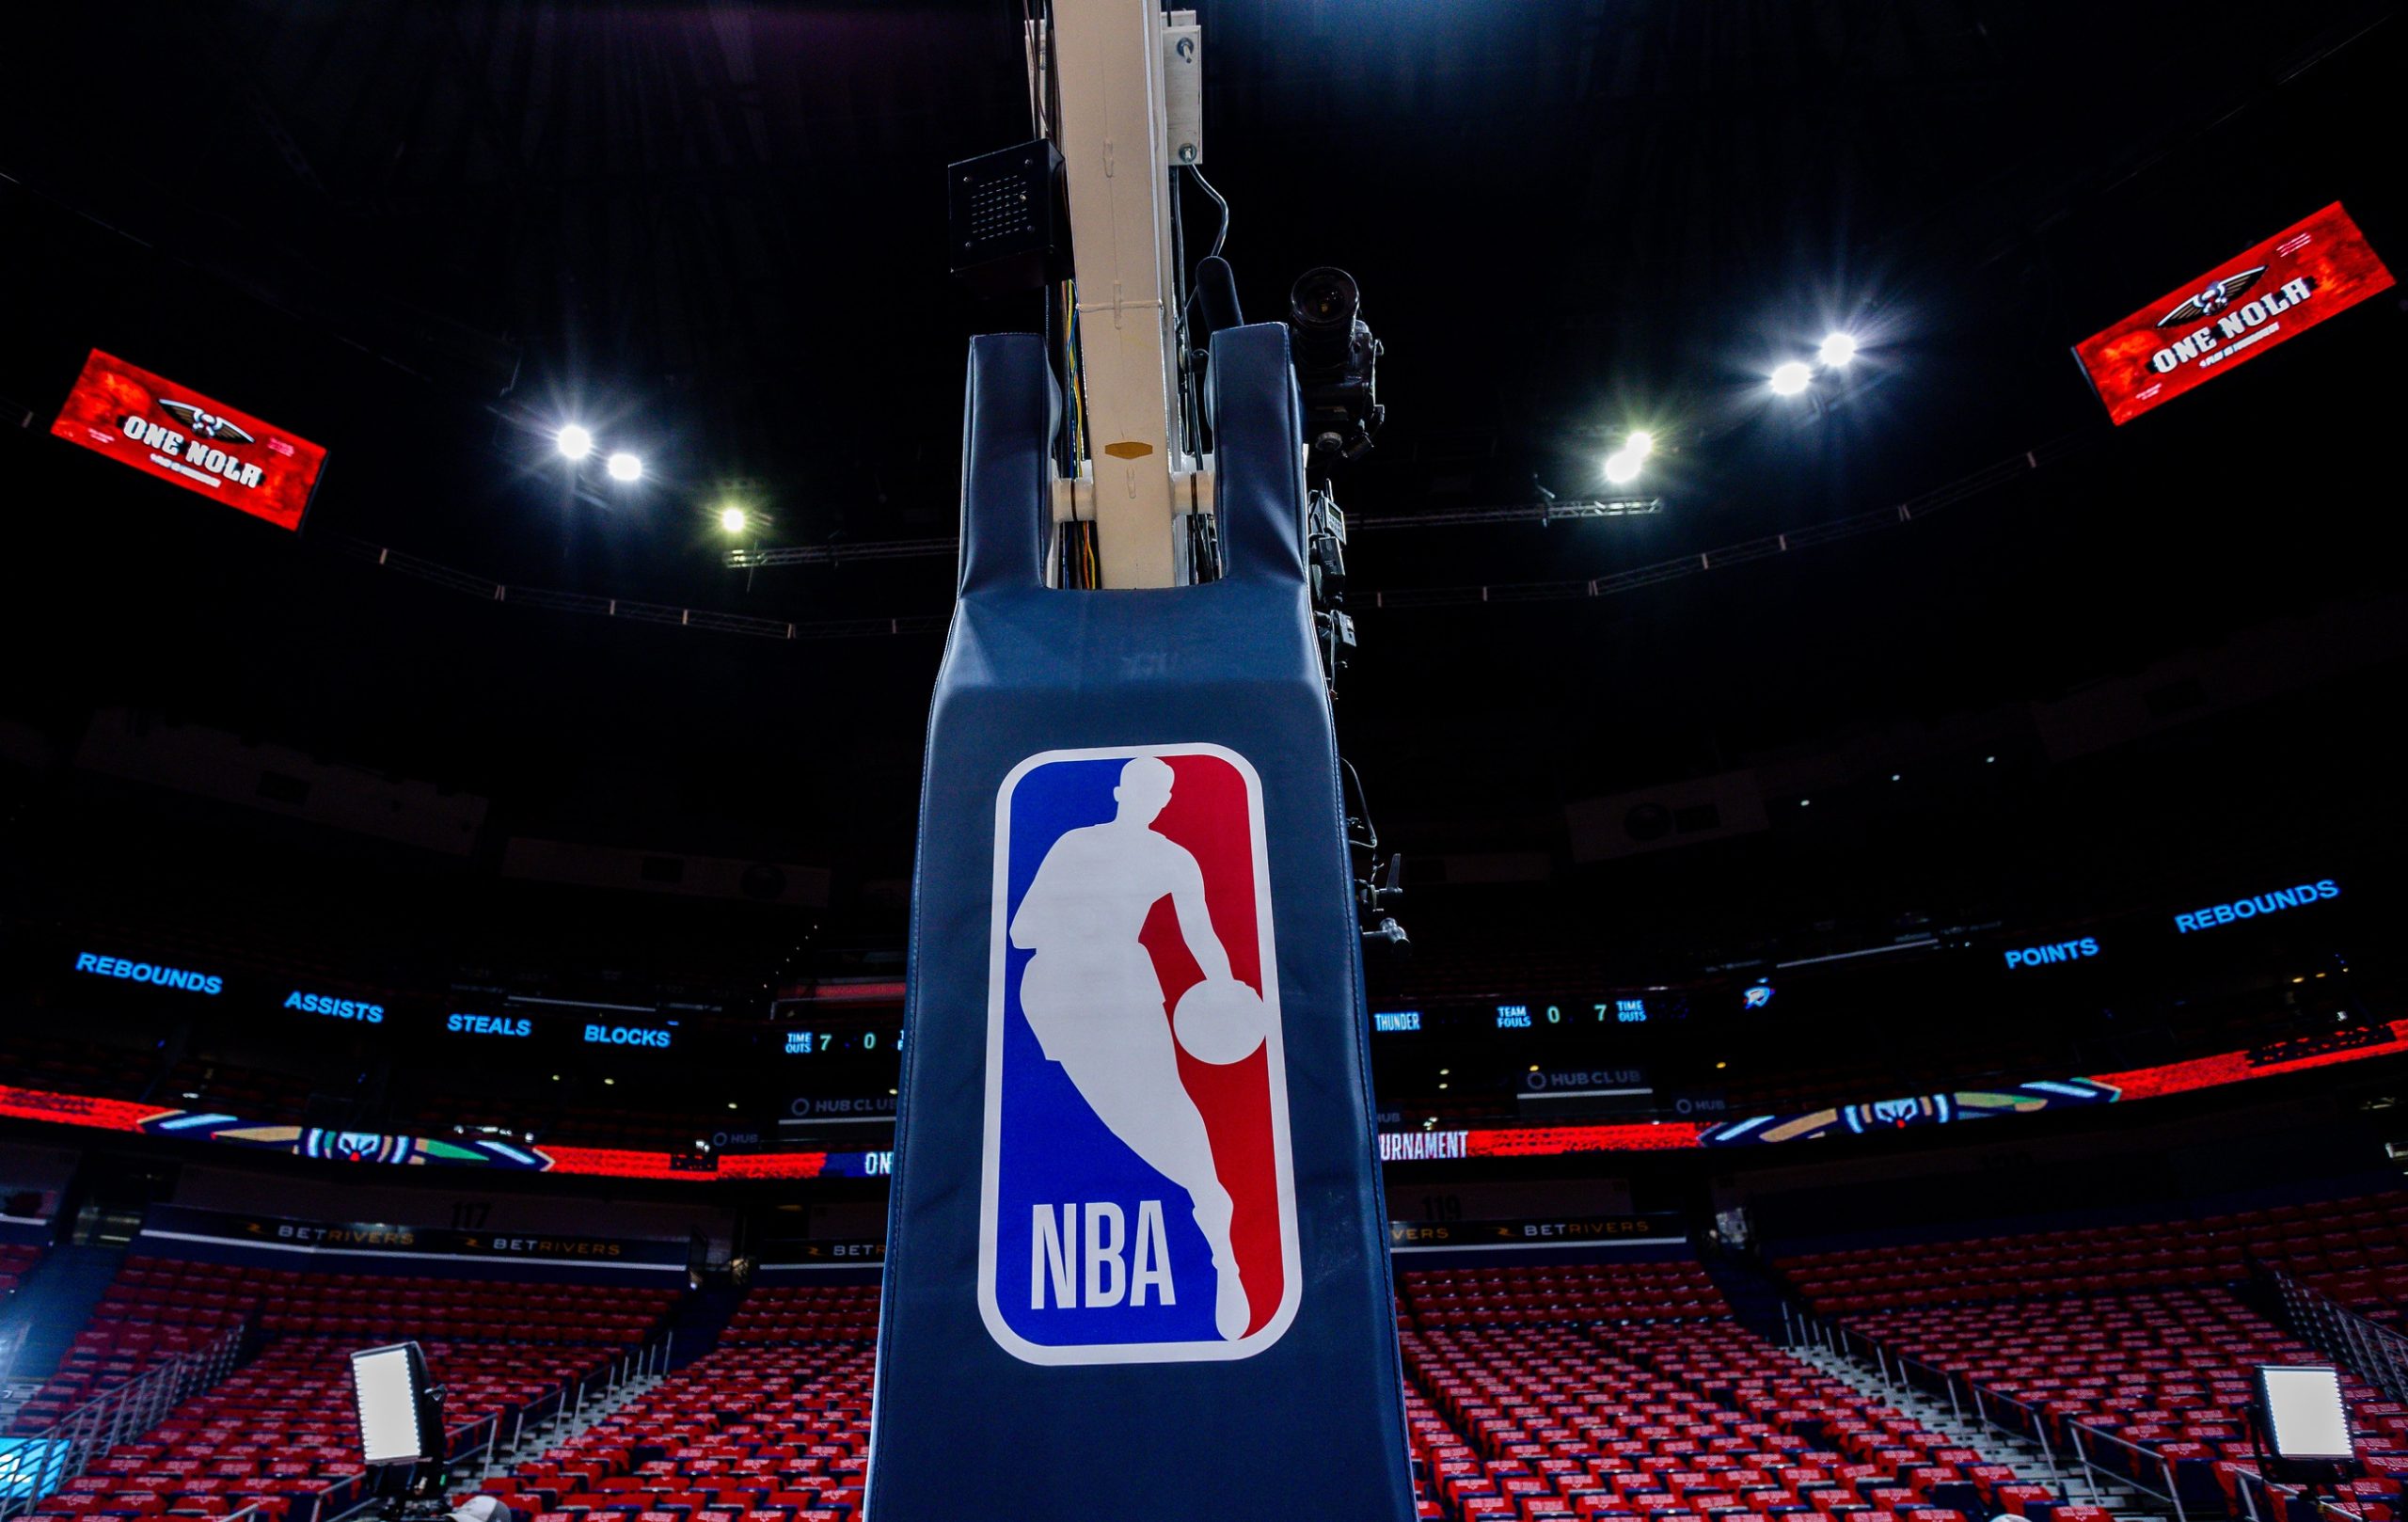 Apr 12, 2023; New Orleans, Louisiana, USA; Detailed view of the Play-In signage on the court before the game between the New Orleans Pelicans and the Oklahoma City Thunder at Smoothie King Center. Mandatory Credit: Stephen Lew-USA TODAY Sports